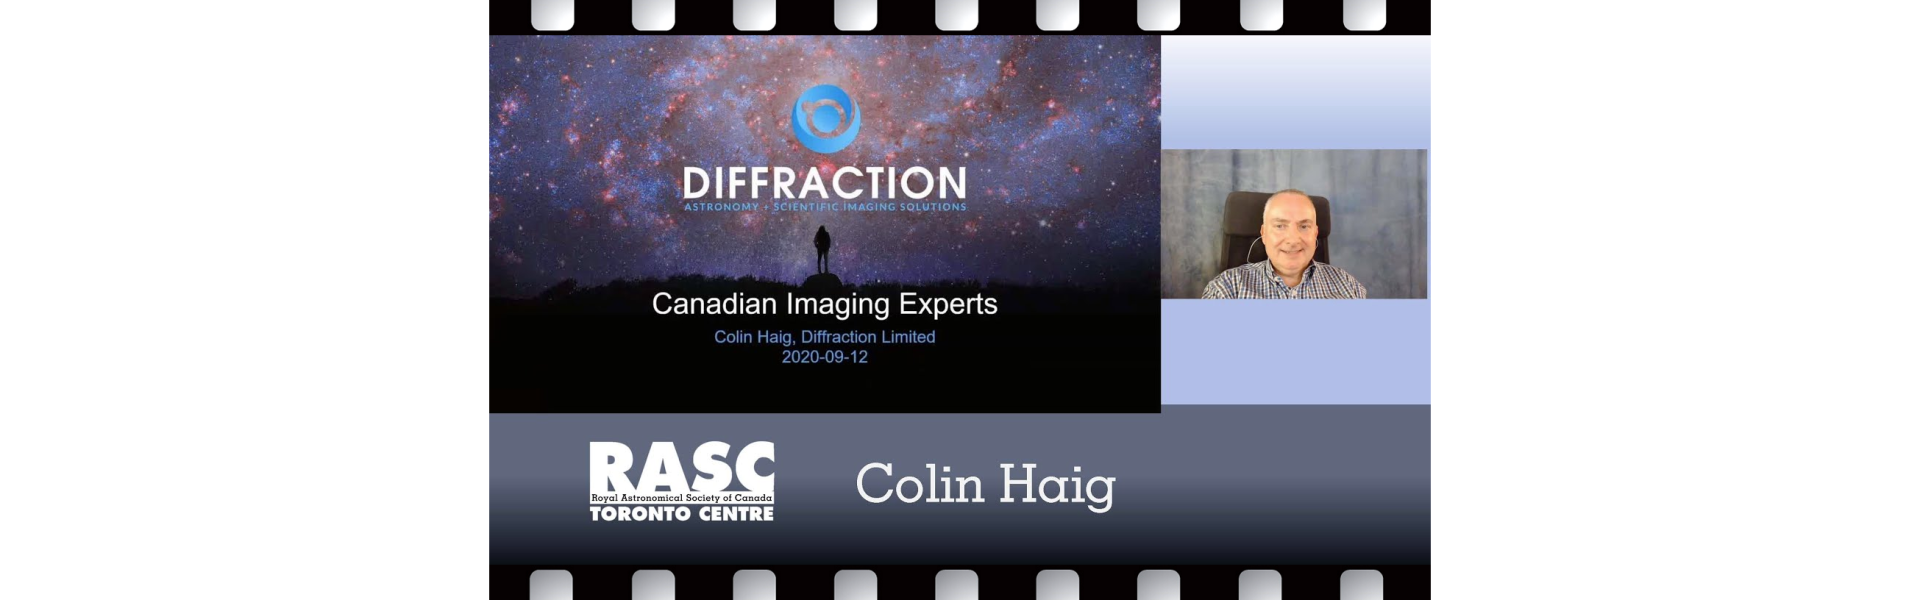 Diffraction: Canadian Imaging Experts